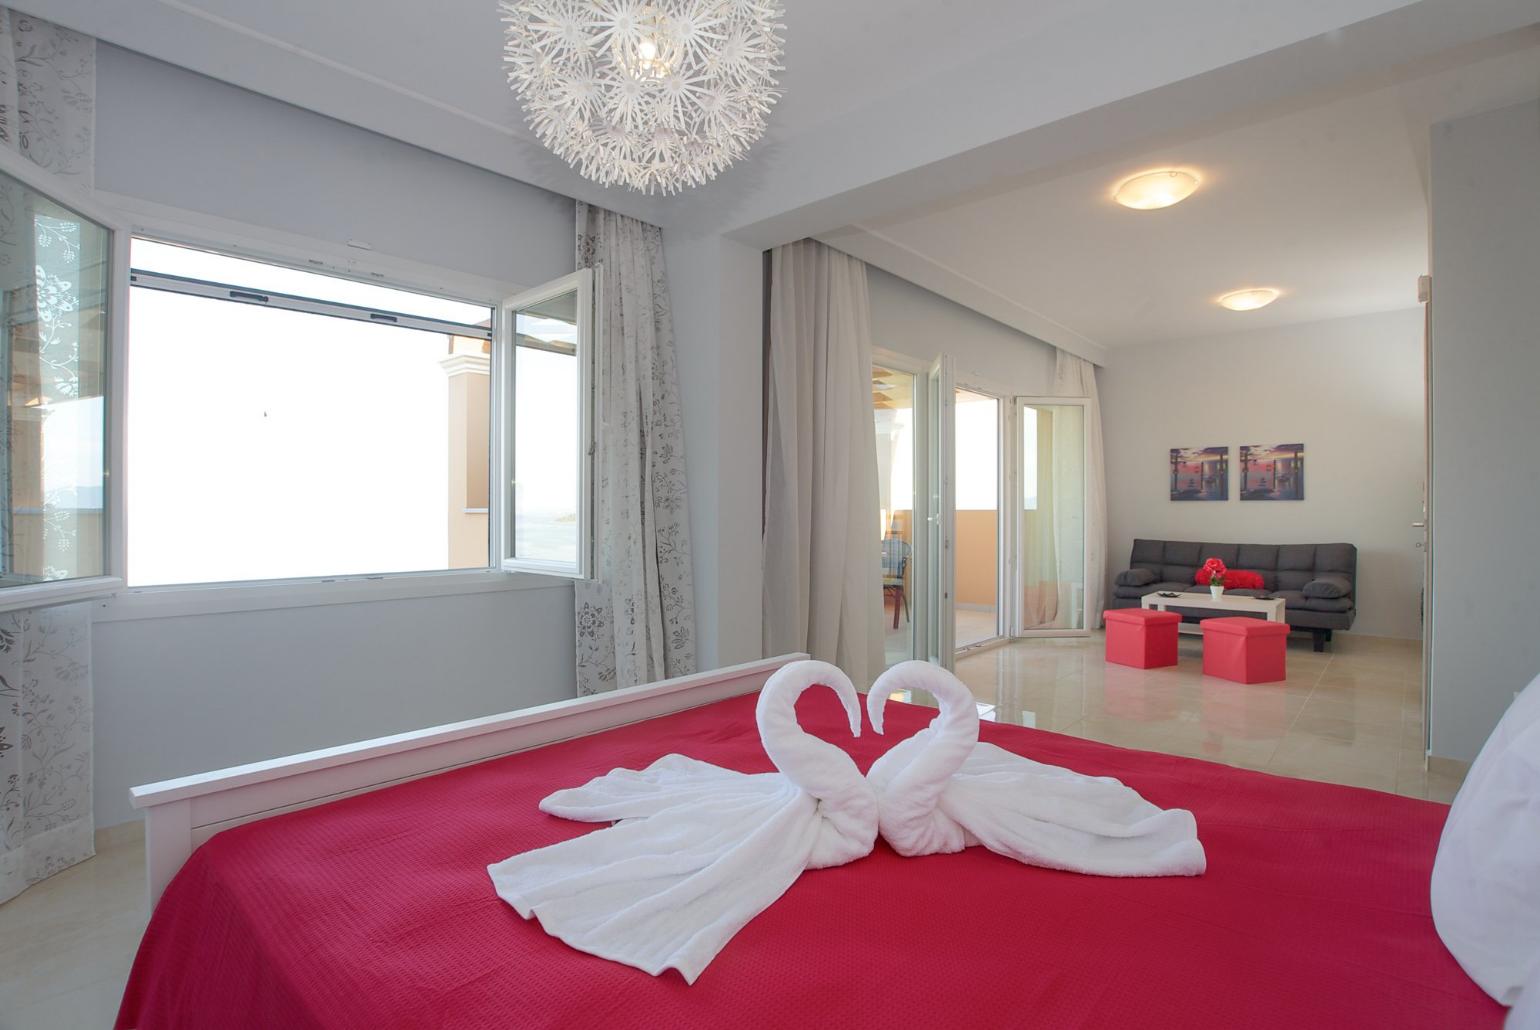 Double bedroom with en suite bathroom, A/C, living area, and balcony access with panoramic sea views